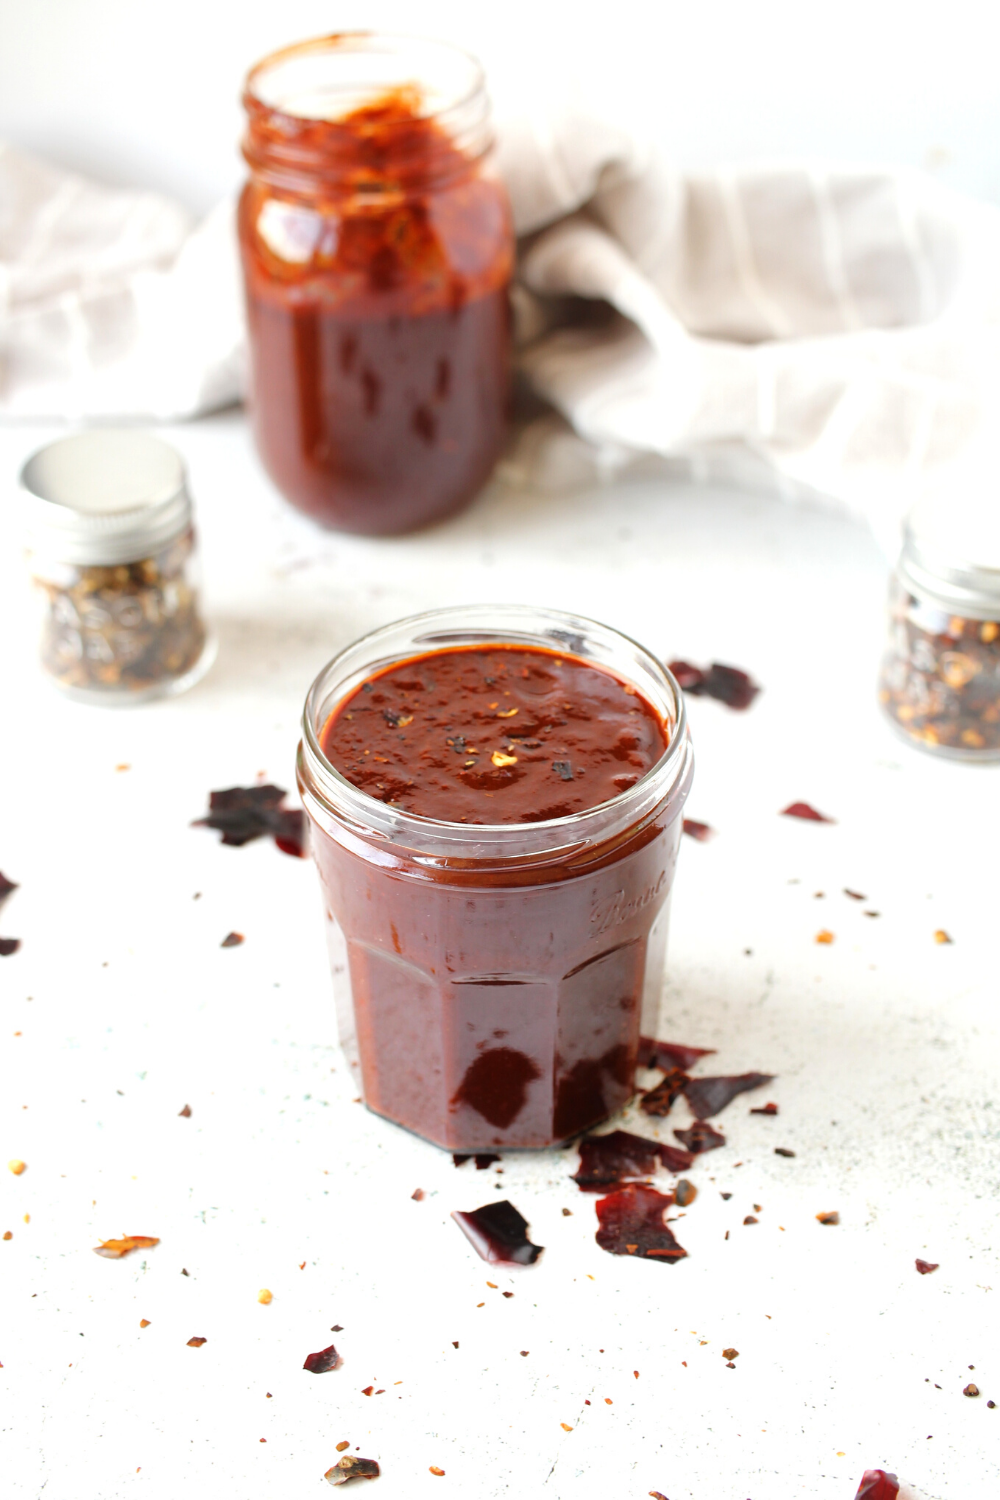 Spicy chocolate sauce made keto and dairy-free